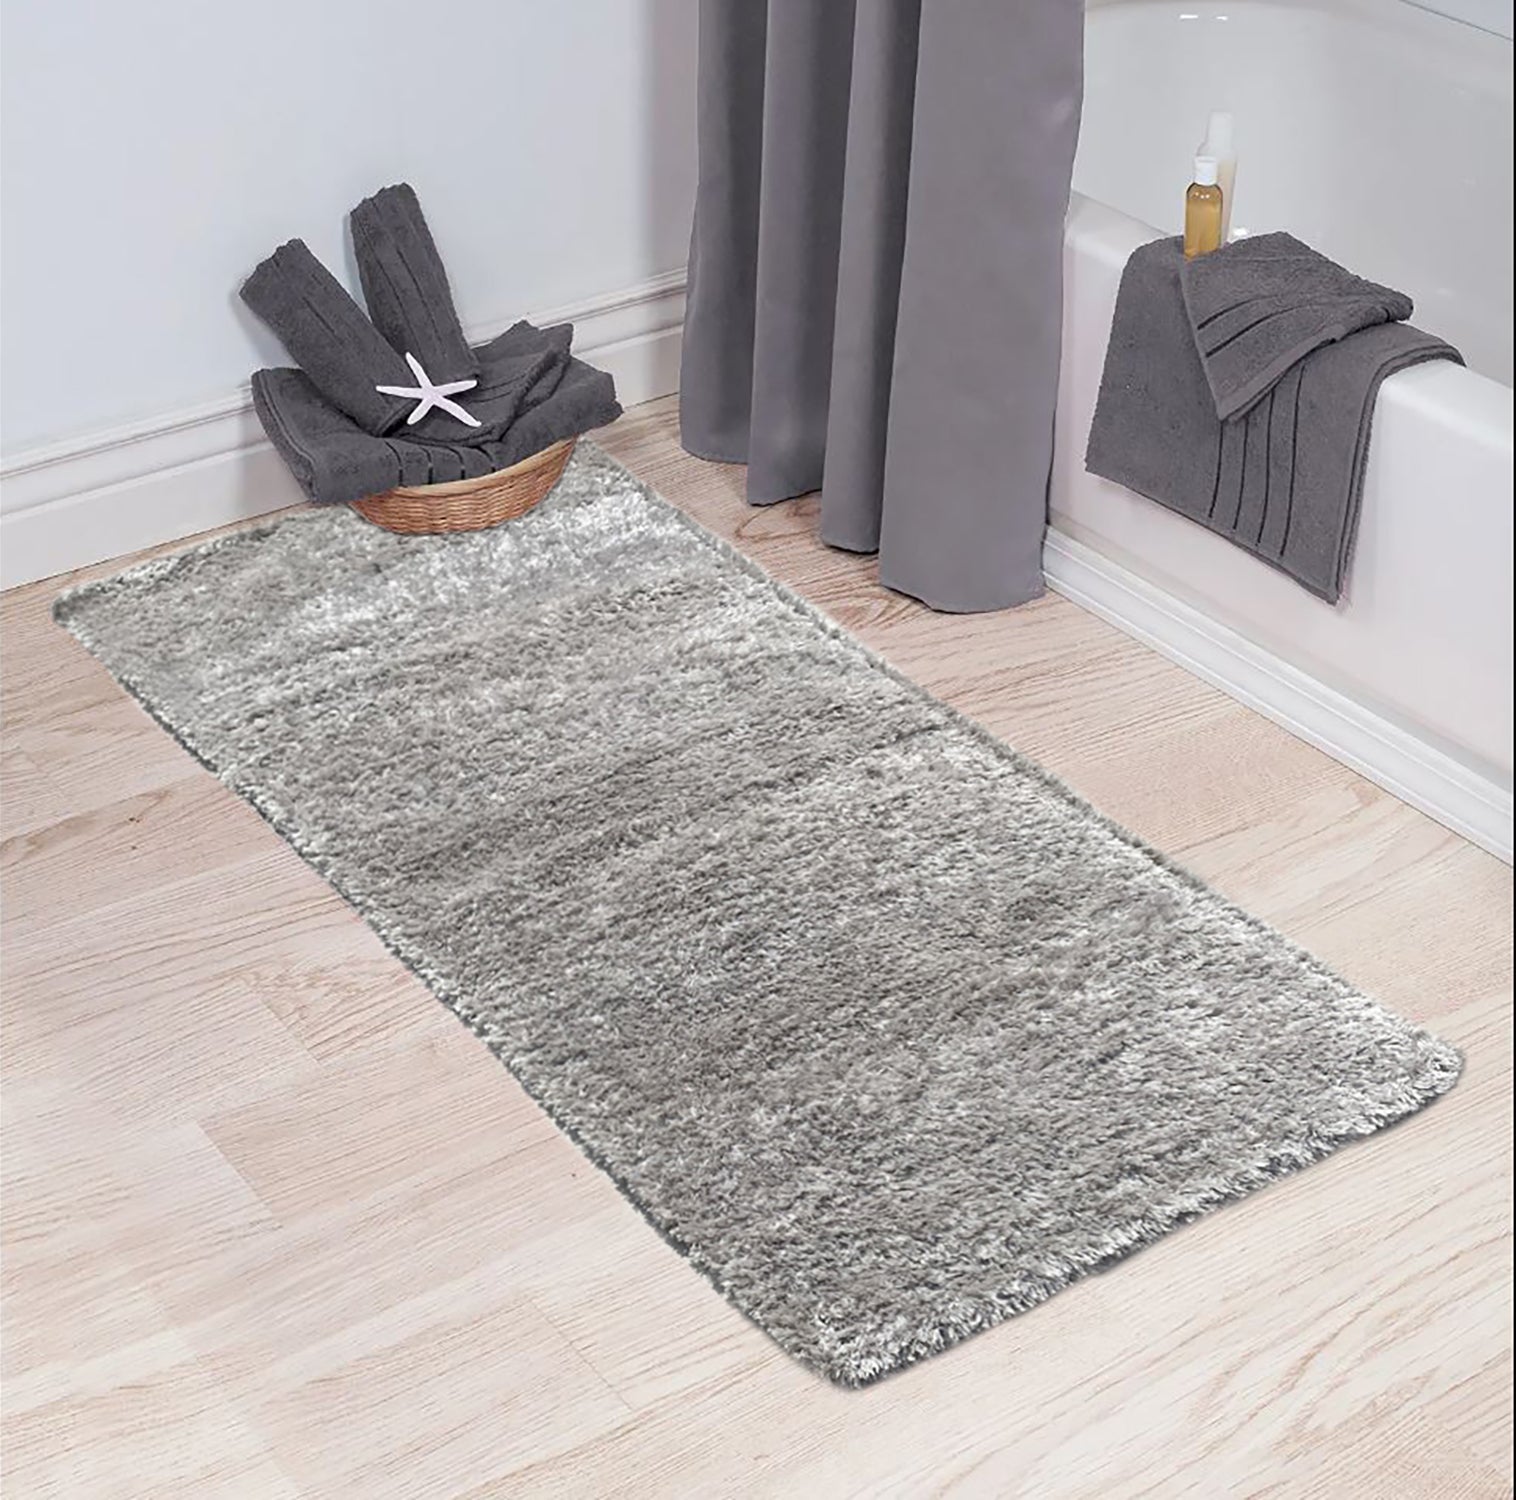 2' x 5' Feet Silver Shimmer Shag Shaggy Reversible Soft Solid Color Area Rug